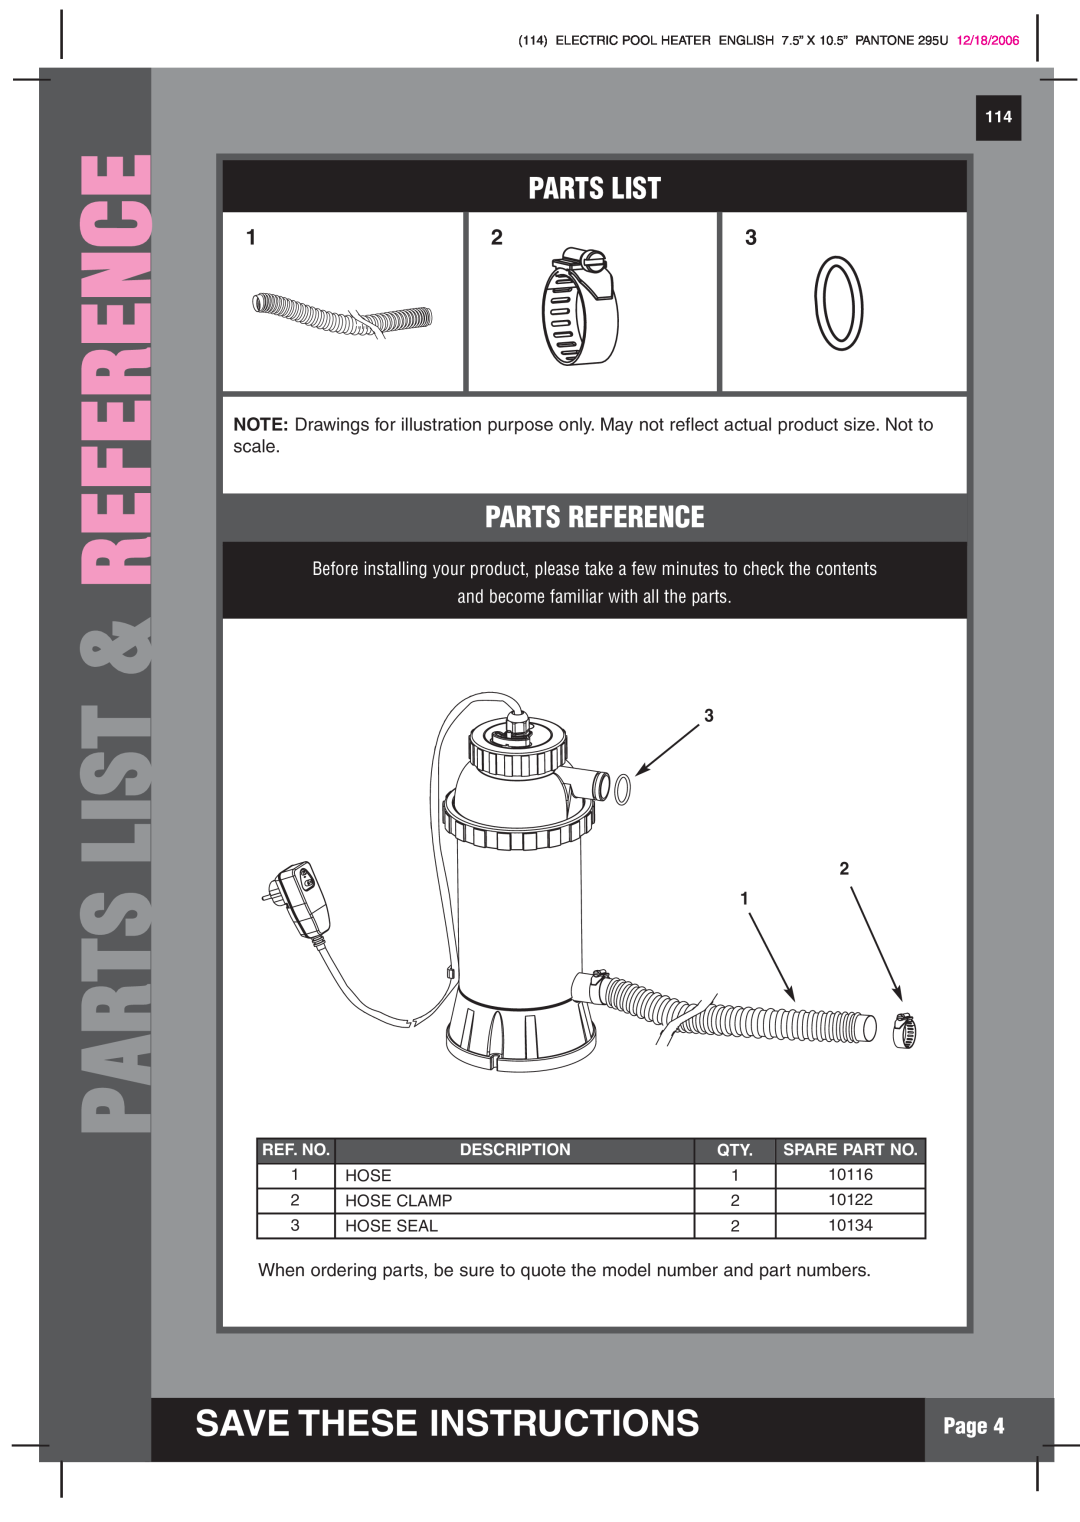 Intex Recreation HT30220 manual Parts List & Reference, Parts Reference, Save These Instructions, Page 